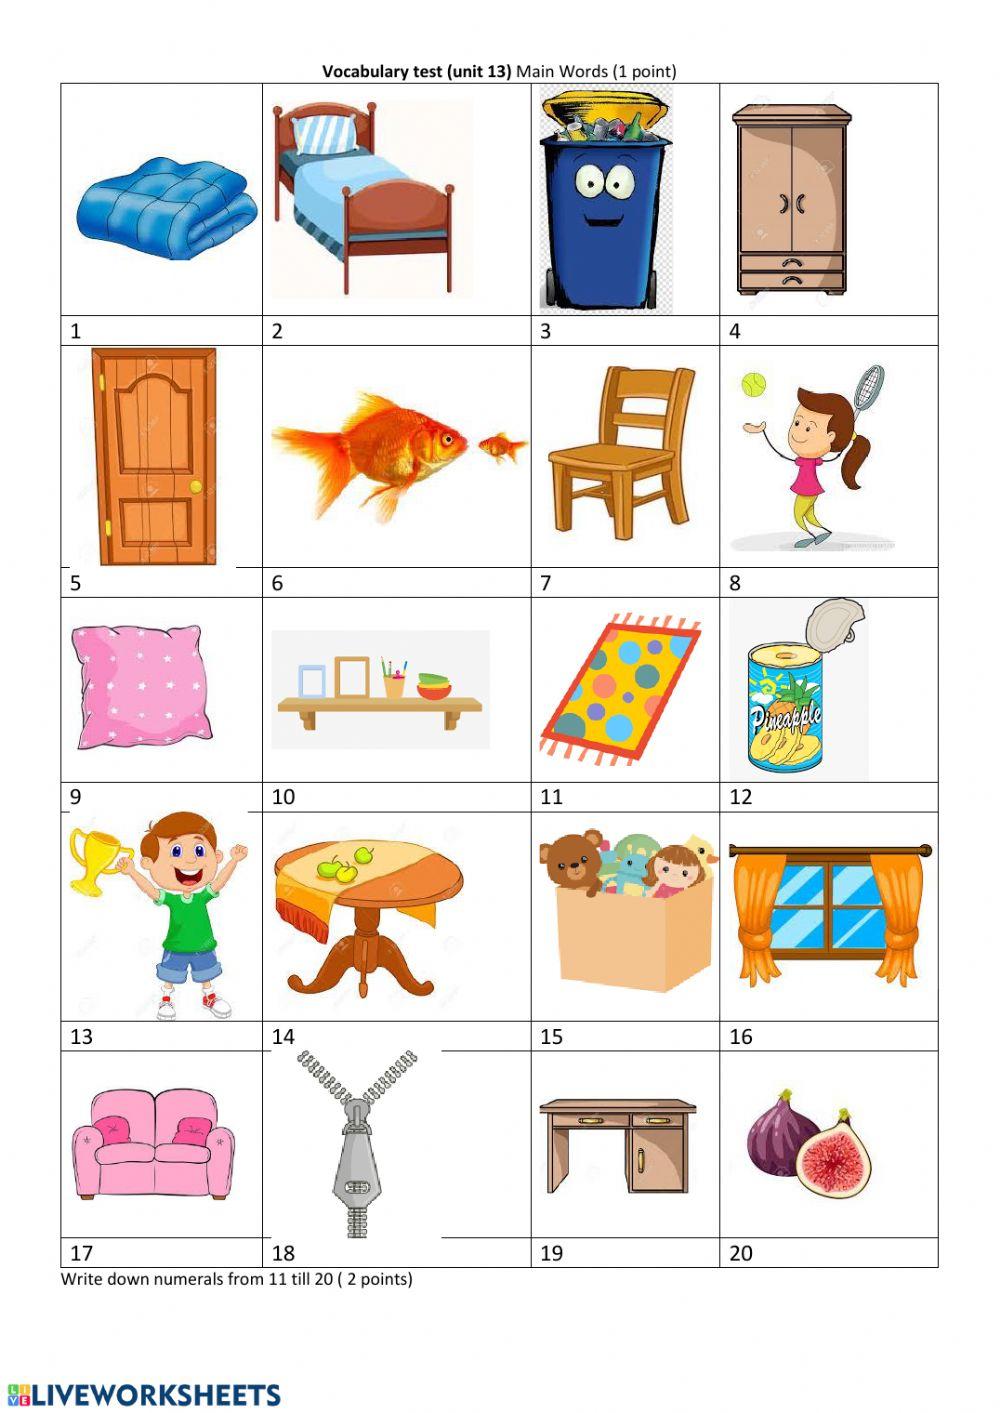 Vocabulary test Unit 13 Family and friends 1